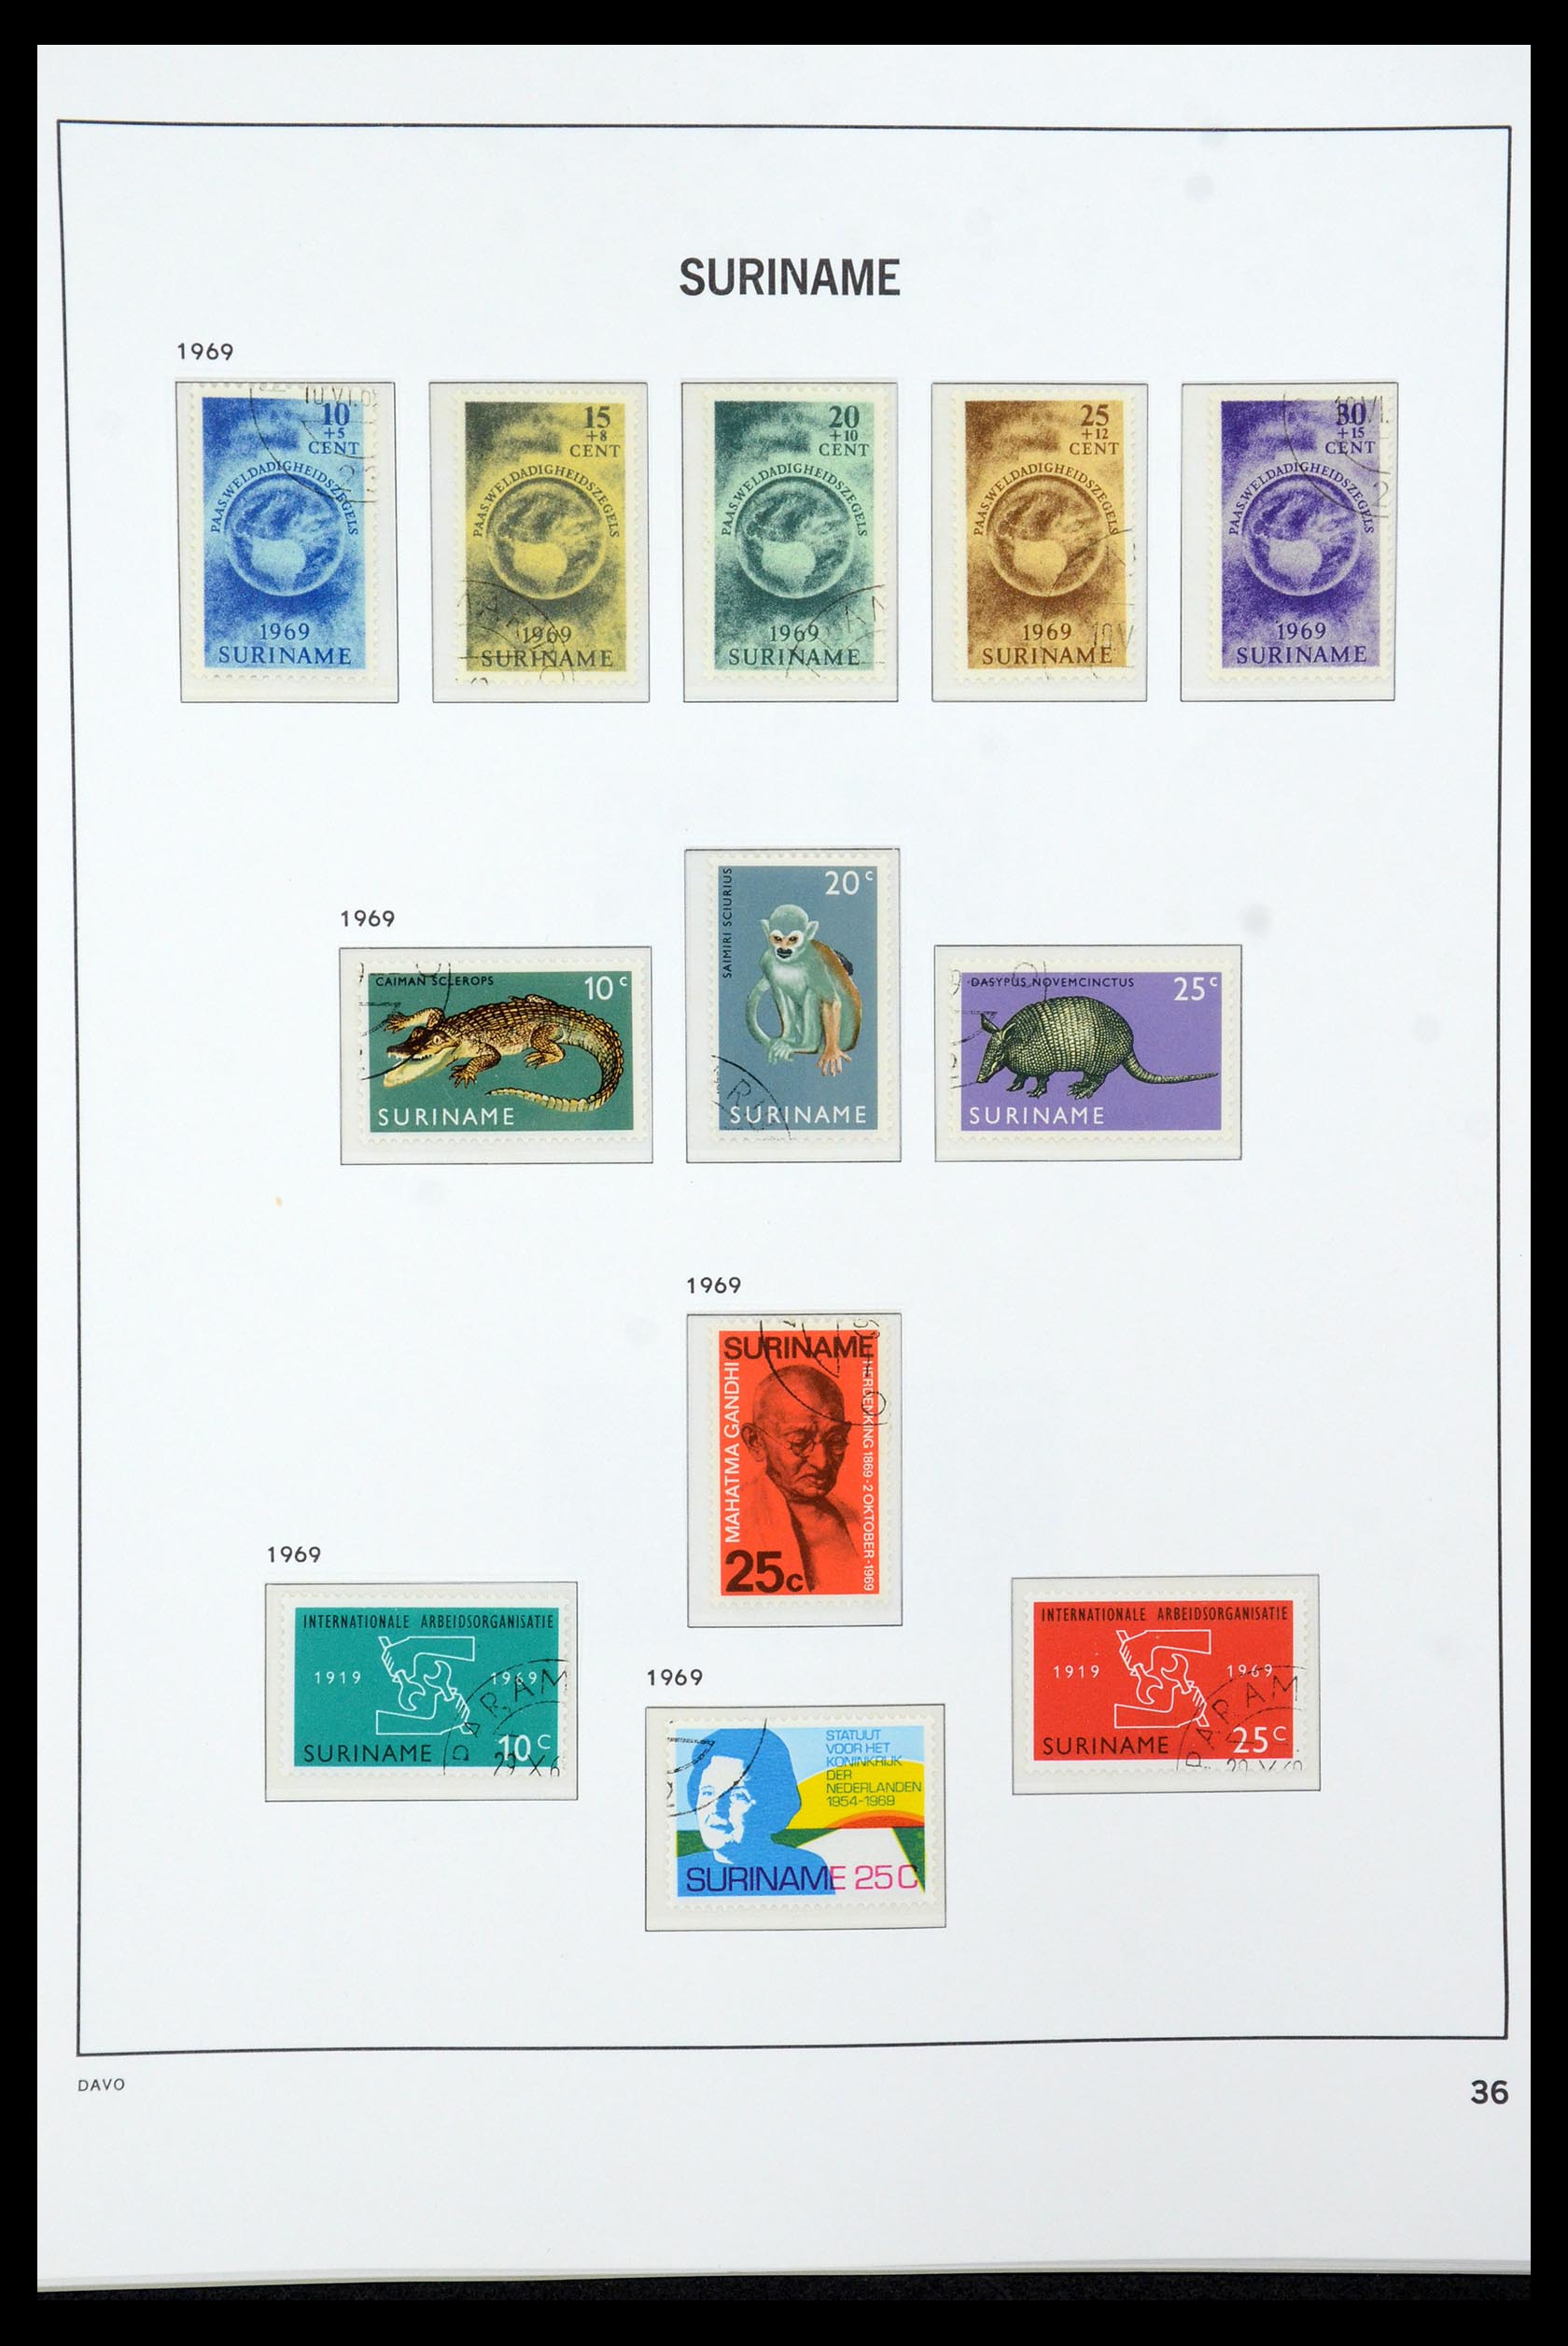 36422 036 - Stamp collection 36422 Suriname 1873-1975.